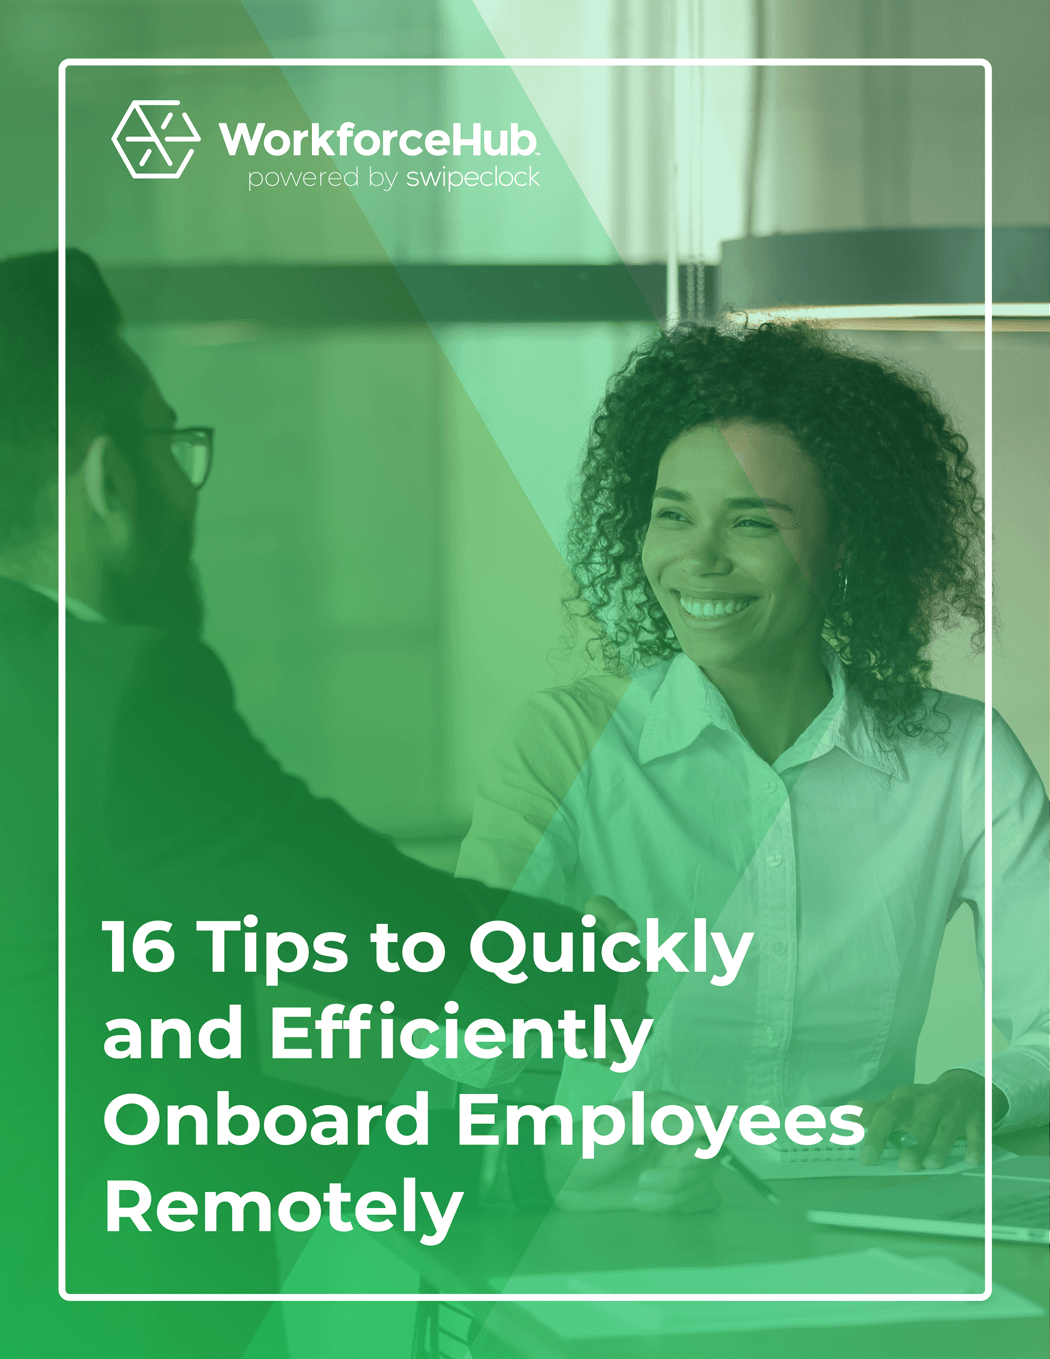 eB-Remotely-Onboarding-Generic-102021-COVER